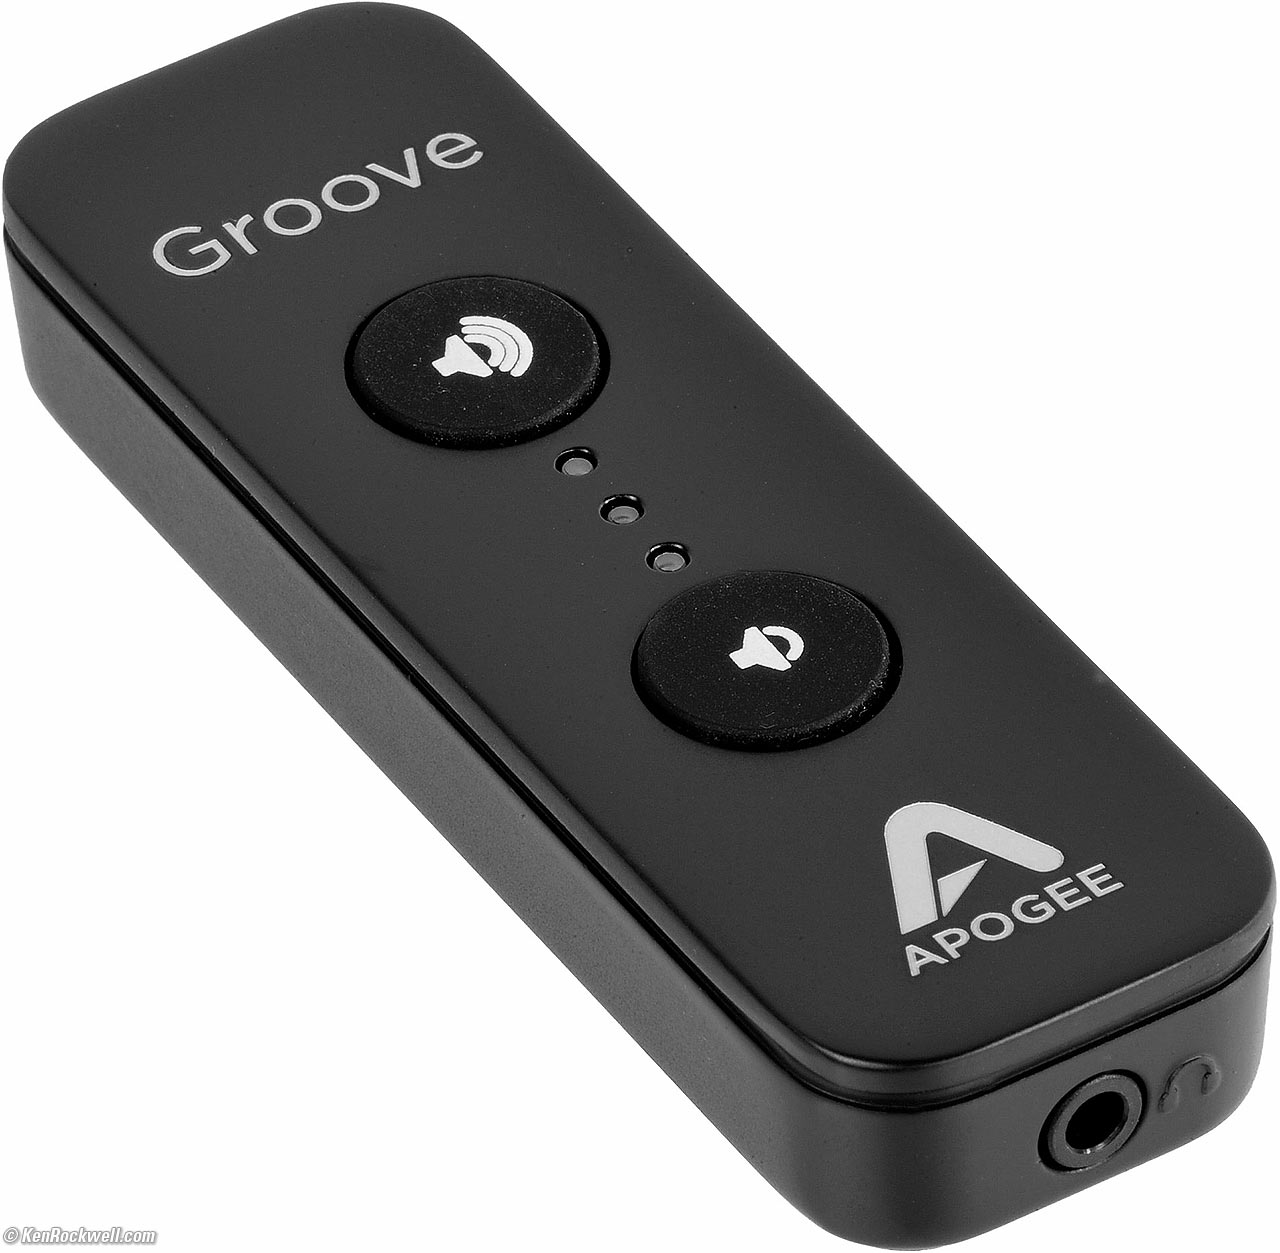 Apogee Groove Review